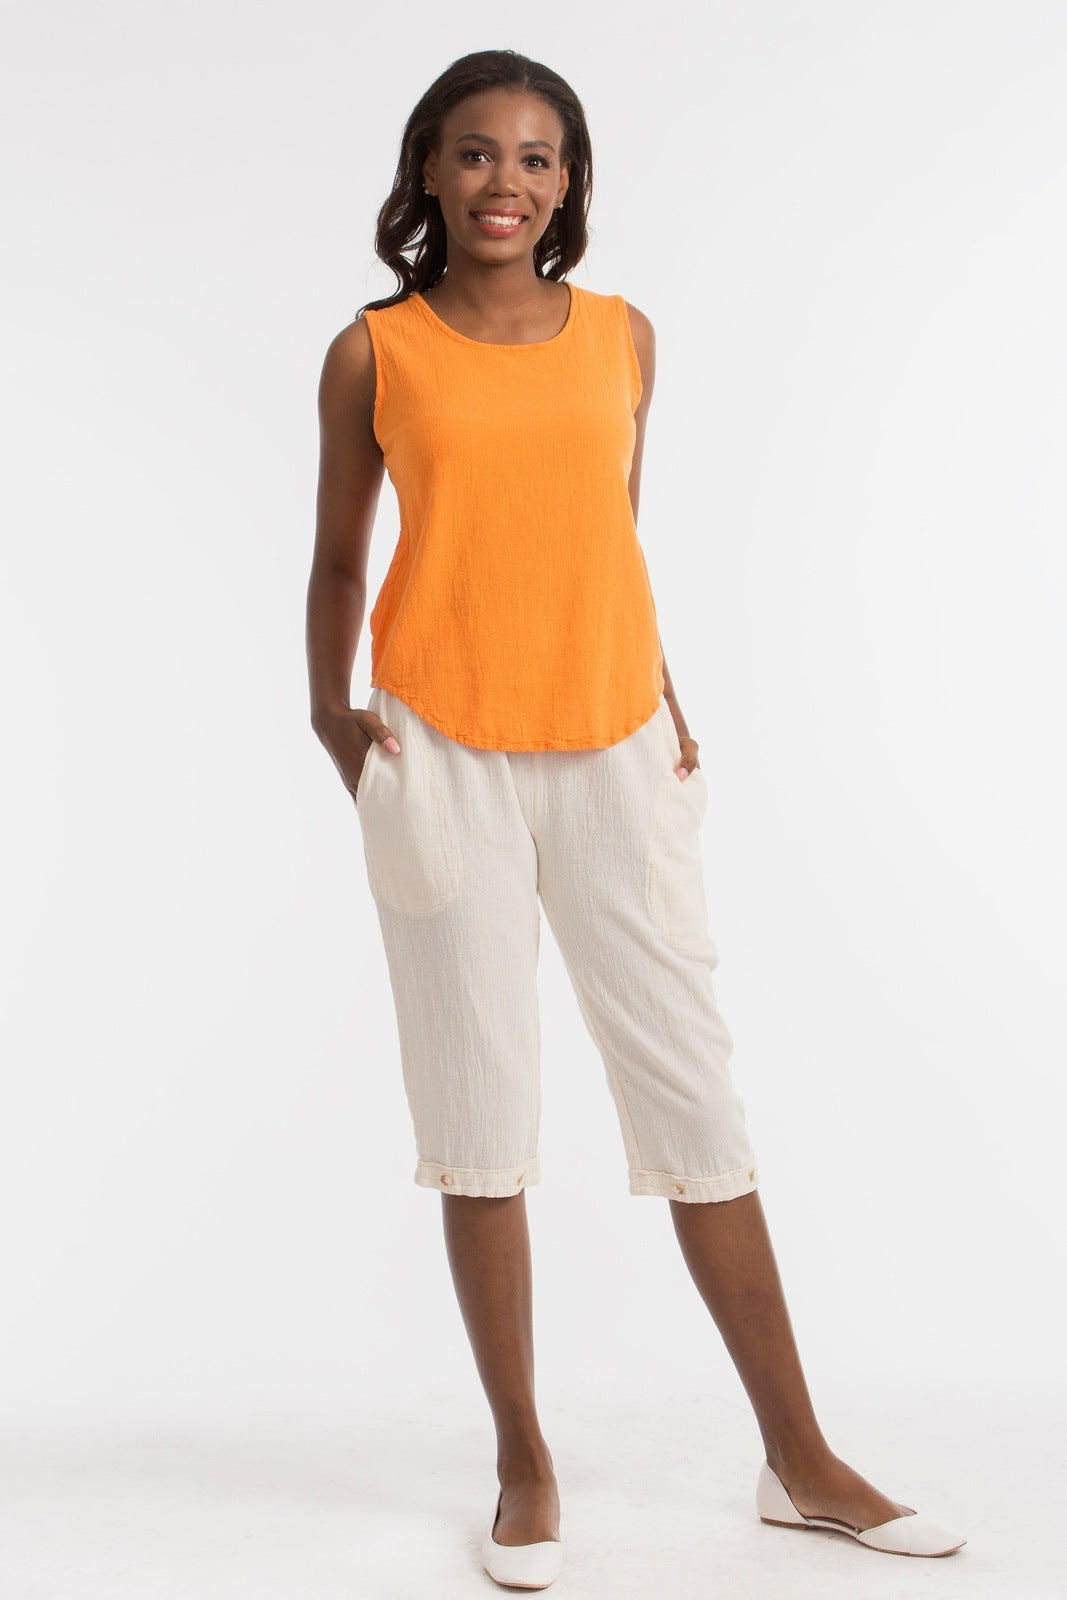 Nydia Our Newest Knee Length Crop Capri with POCKETS!